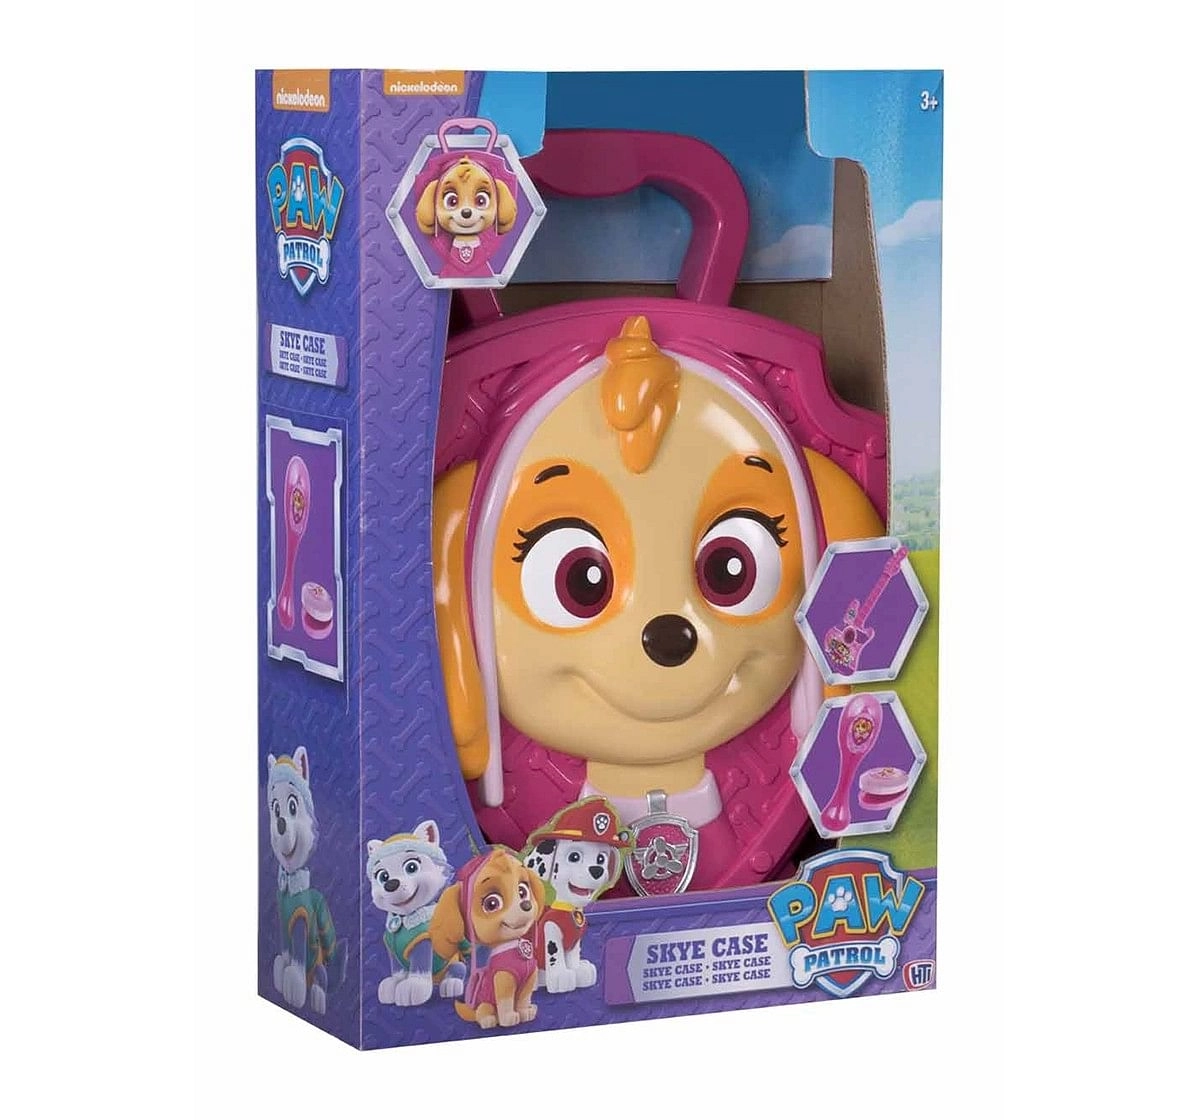 Paw Patrol Chase Case Impulse Toys for age 3Y+ 